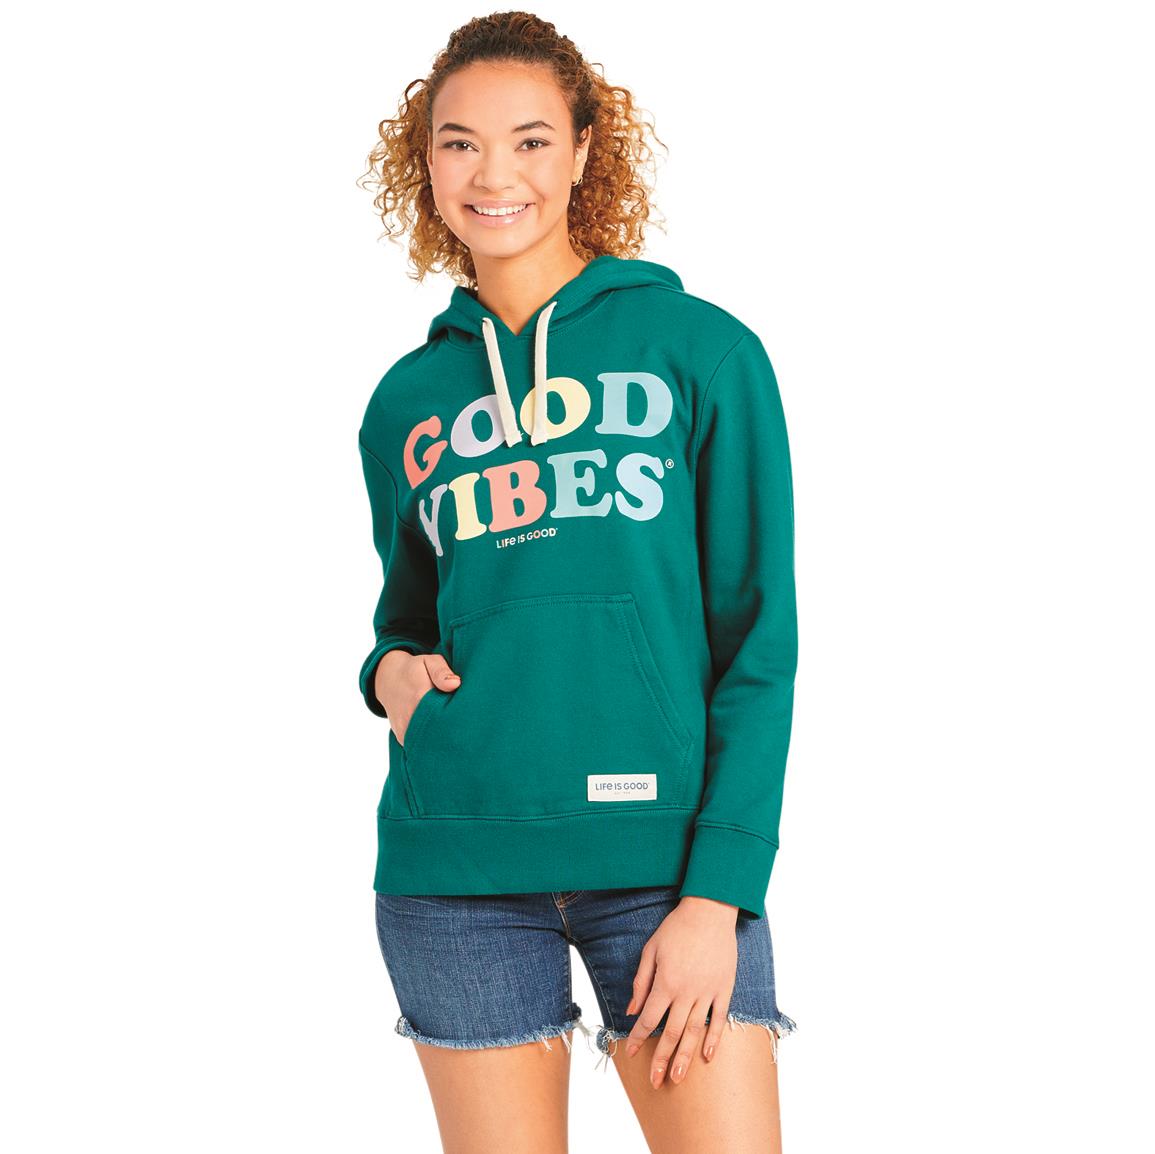 Life Is Good Women's Simply True Good Vibes Hoodie, Spruce Green